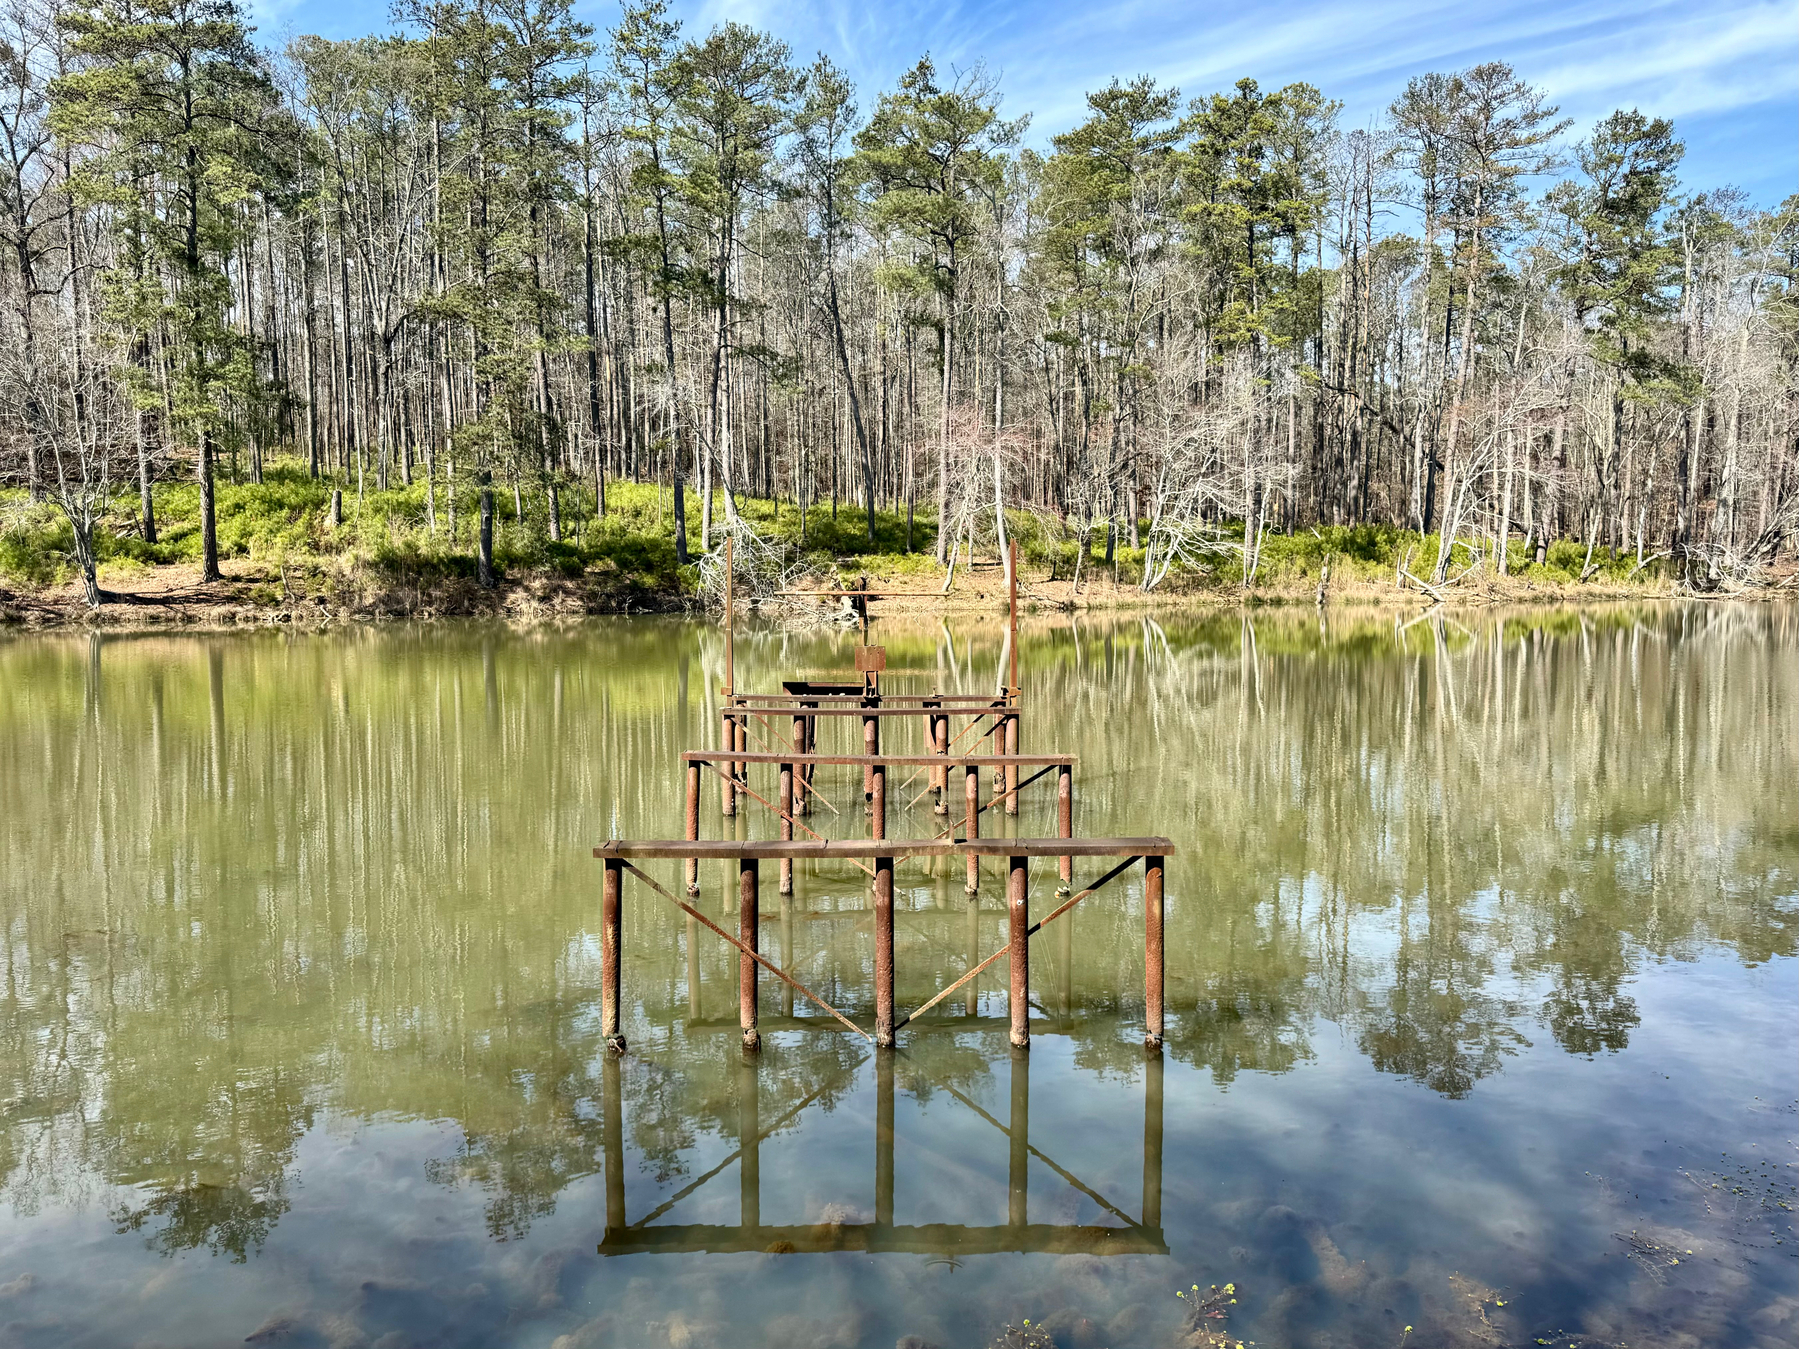 A serene pond with reflections of trees and blue sky, and a rusty metal structure partially submerged in the water.